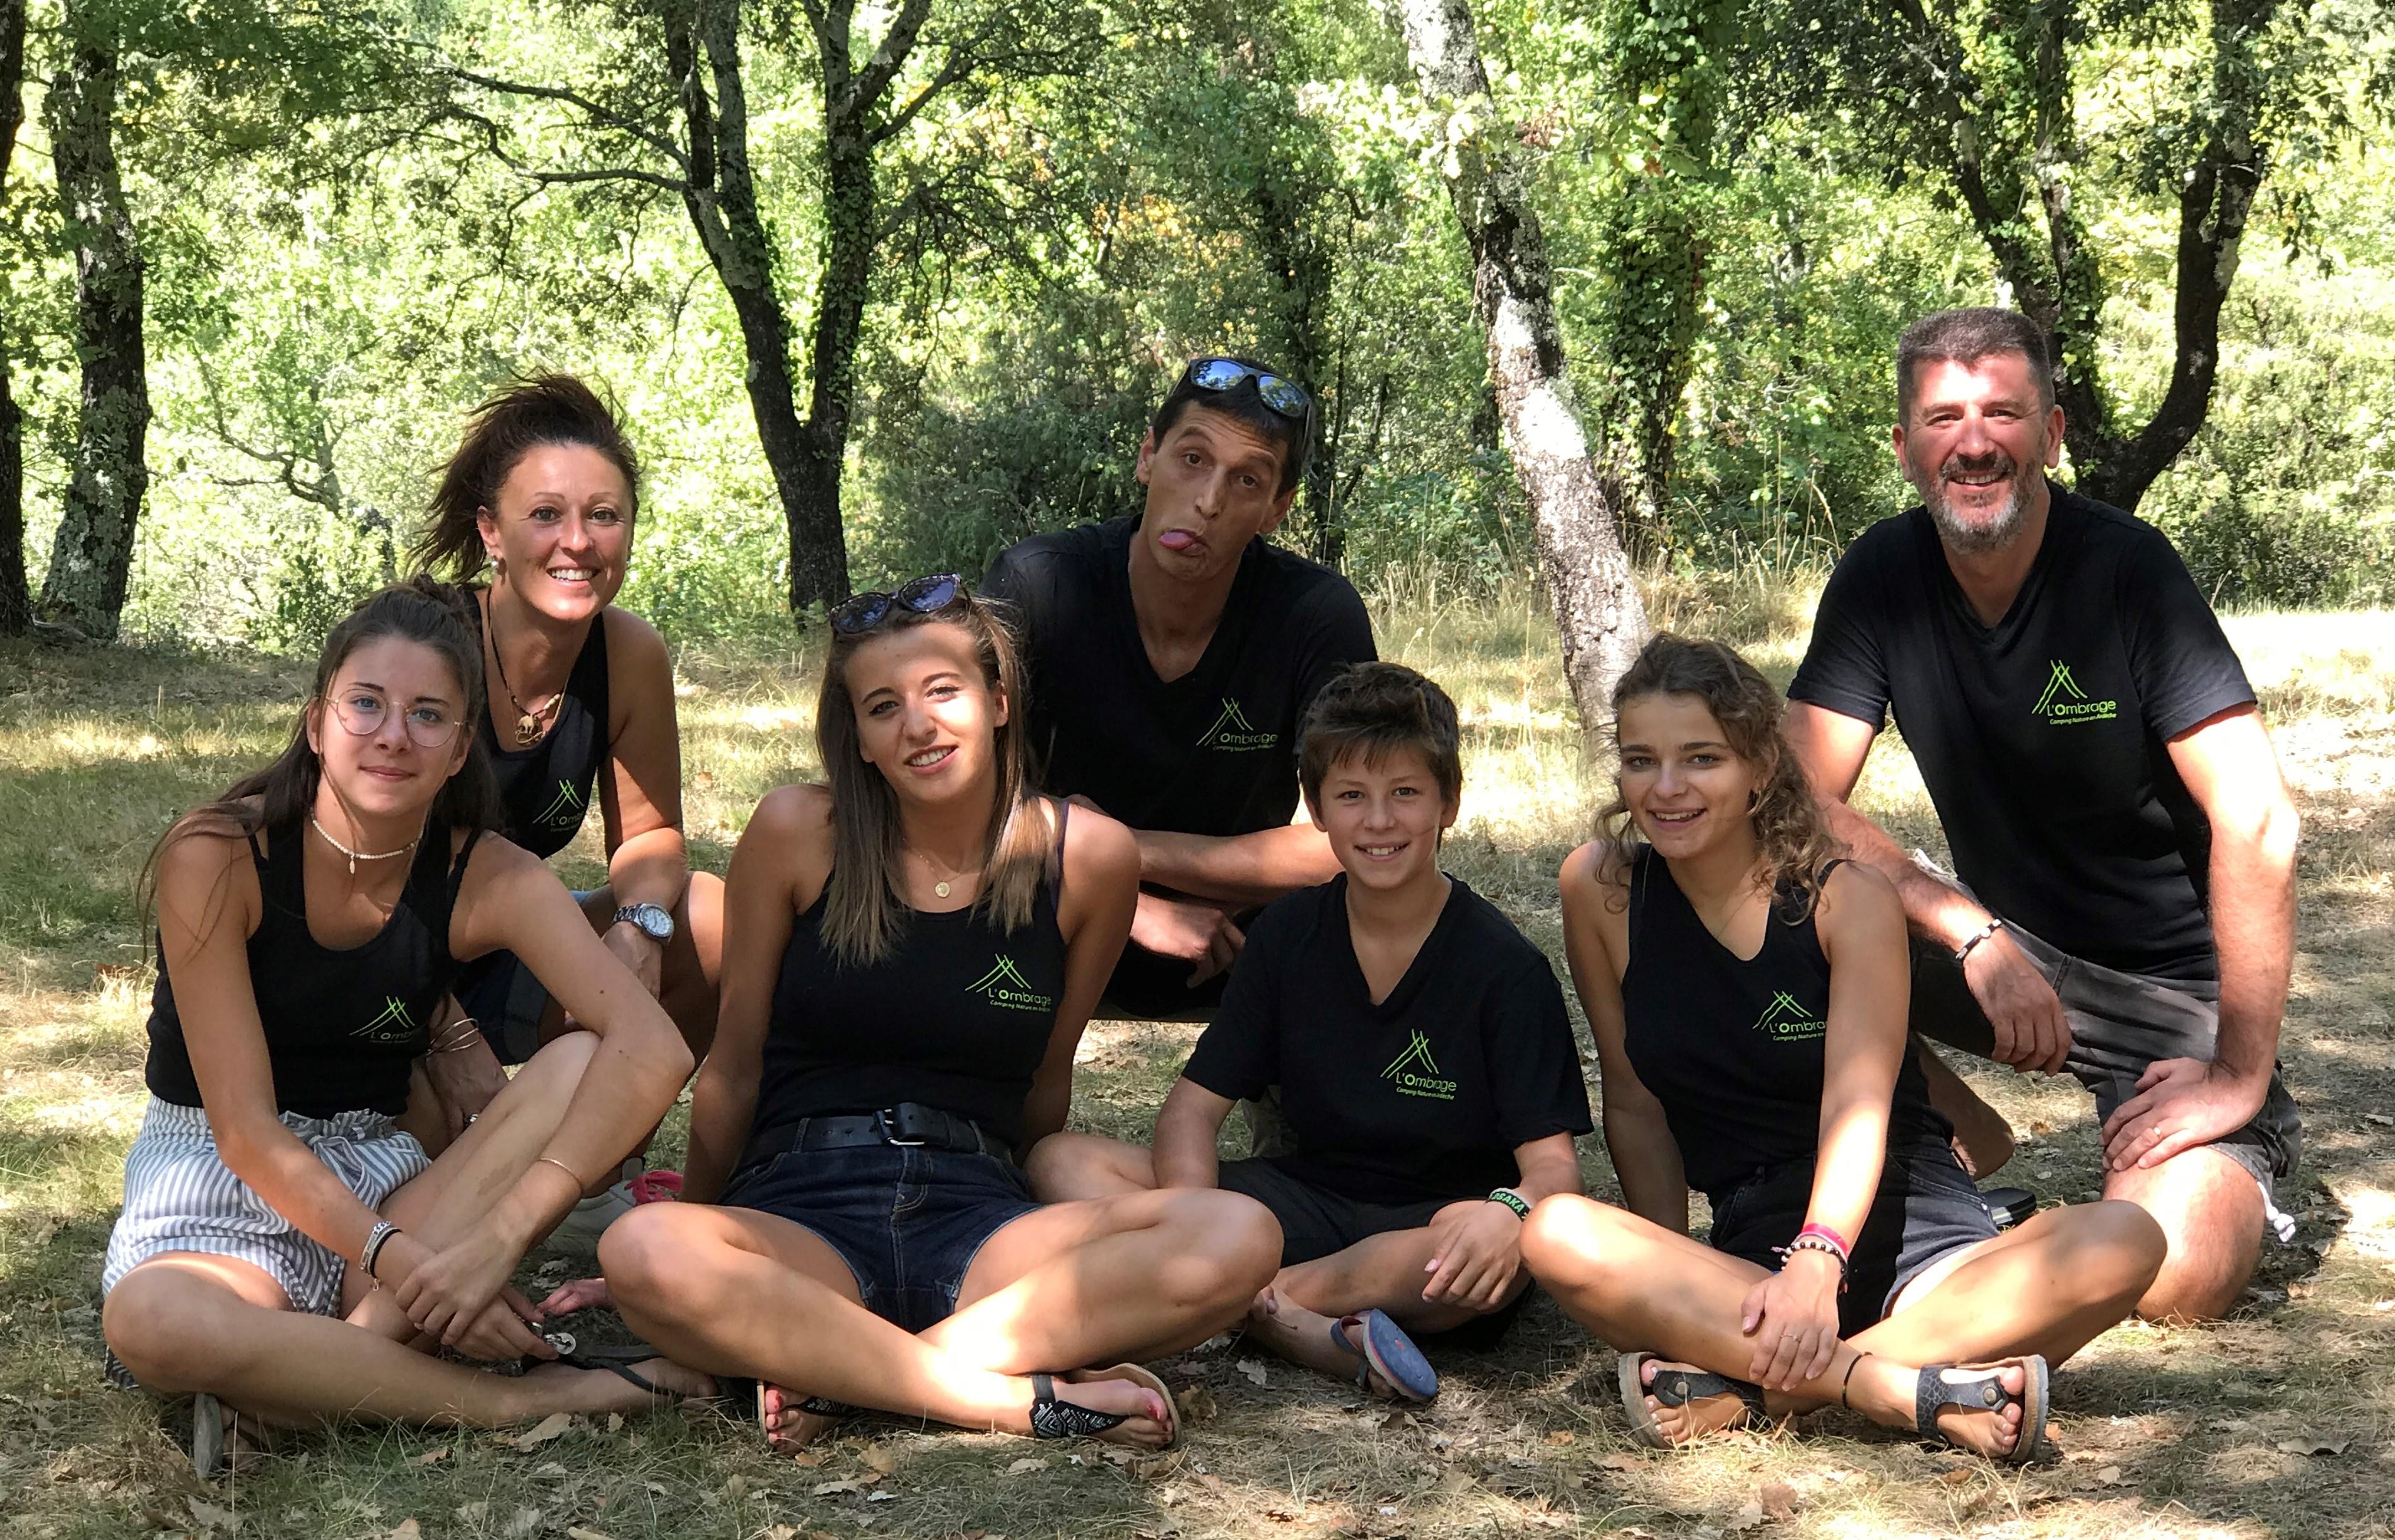 Team Camping L'ombrage - Lagorce - Ruoms